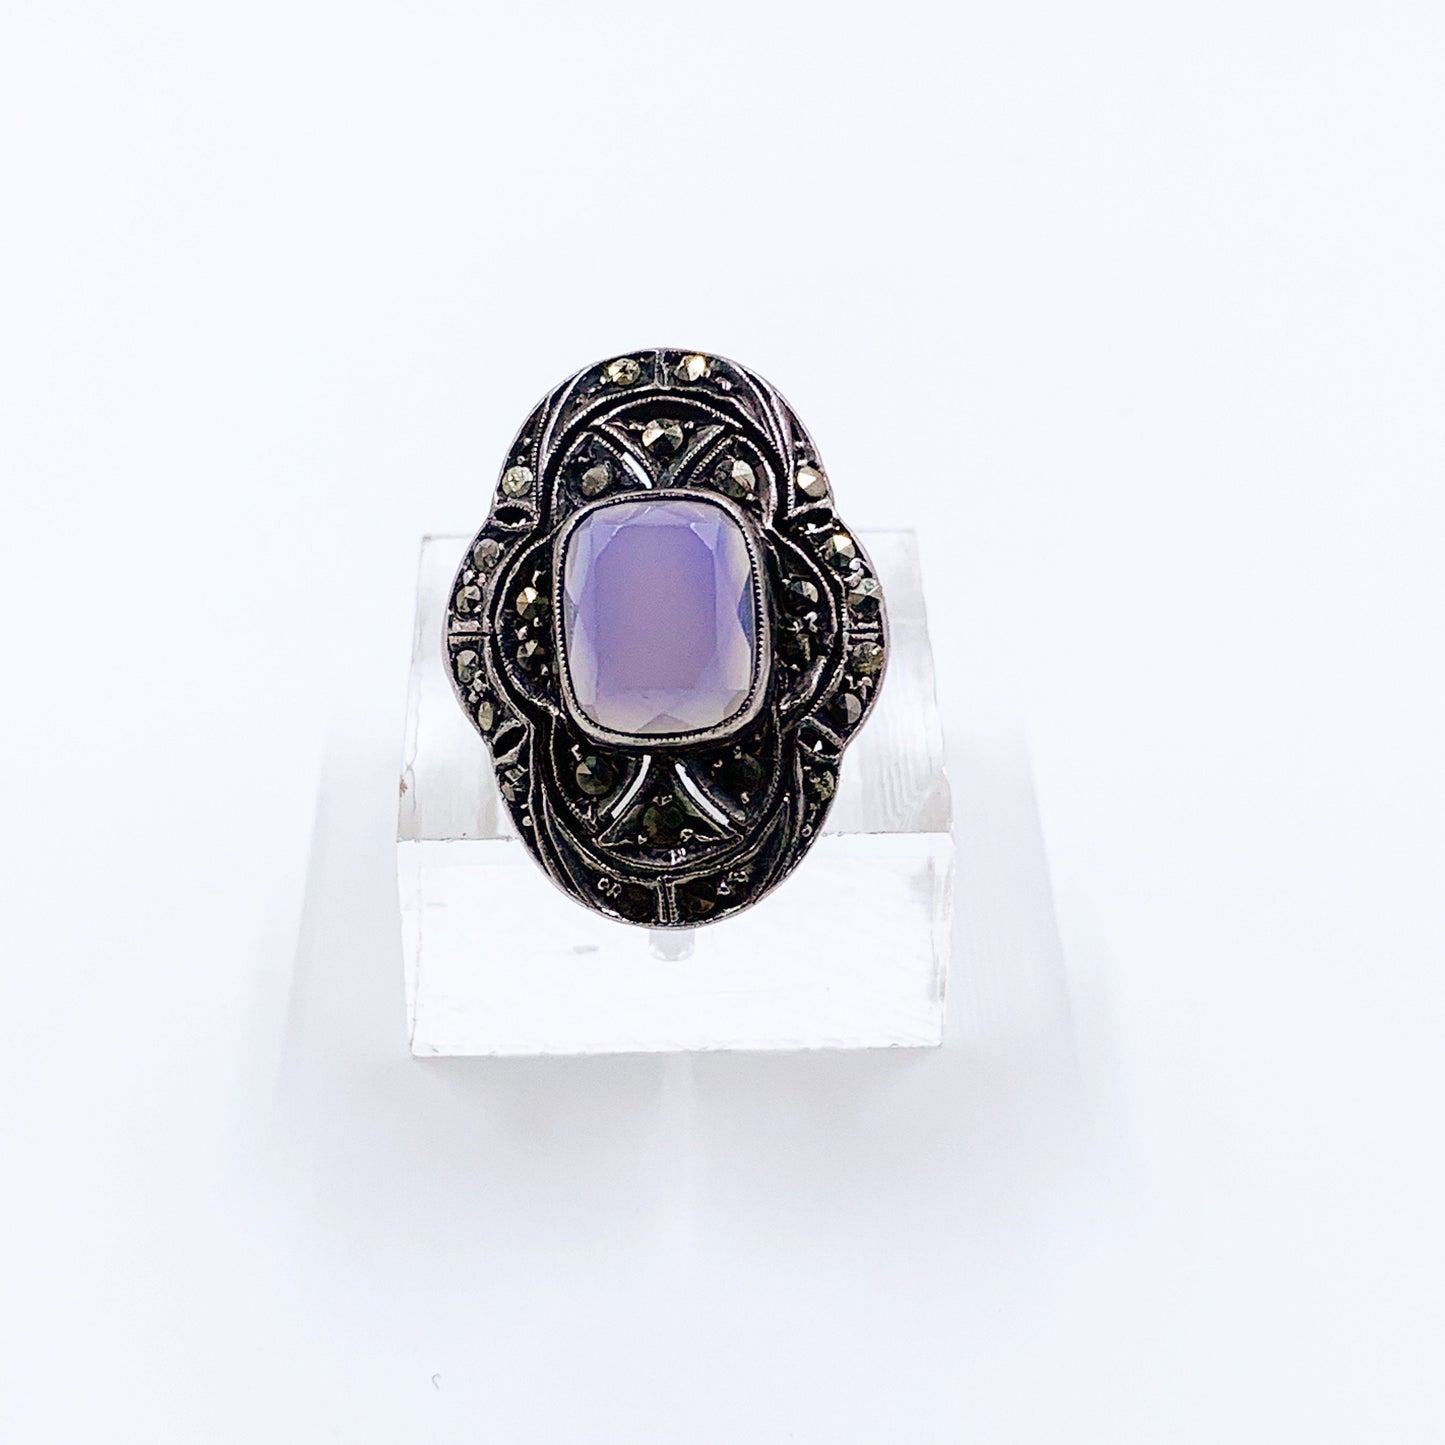 Vintage German Art Deco Marcasite Silver Ring | Sterling Blue Stone Ring | Size 5 1/2